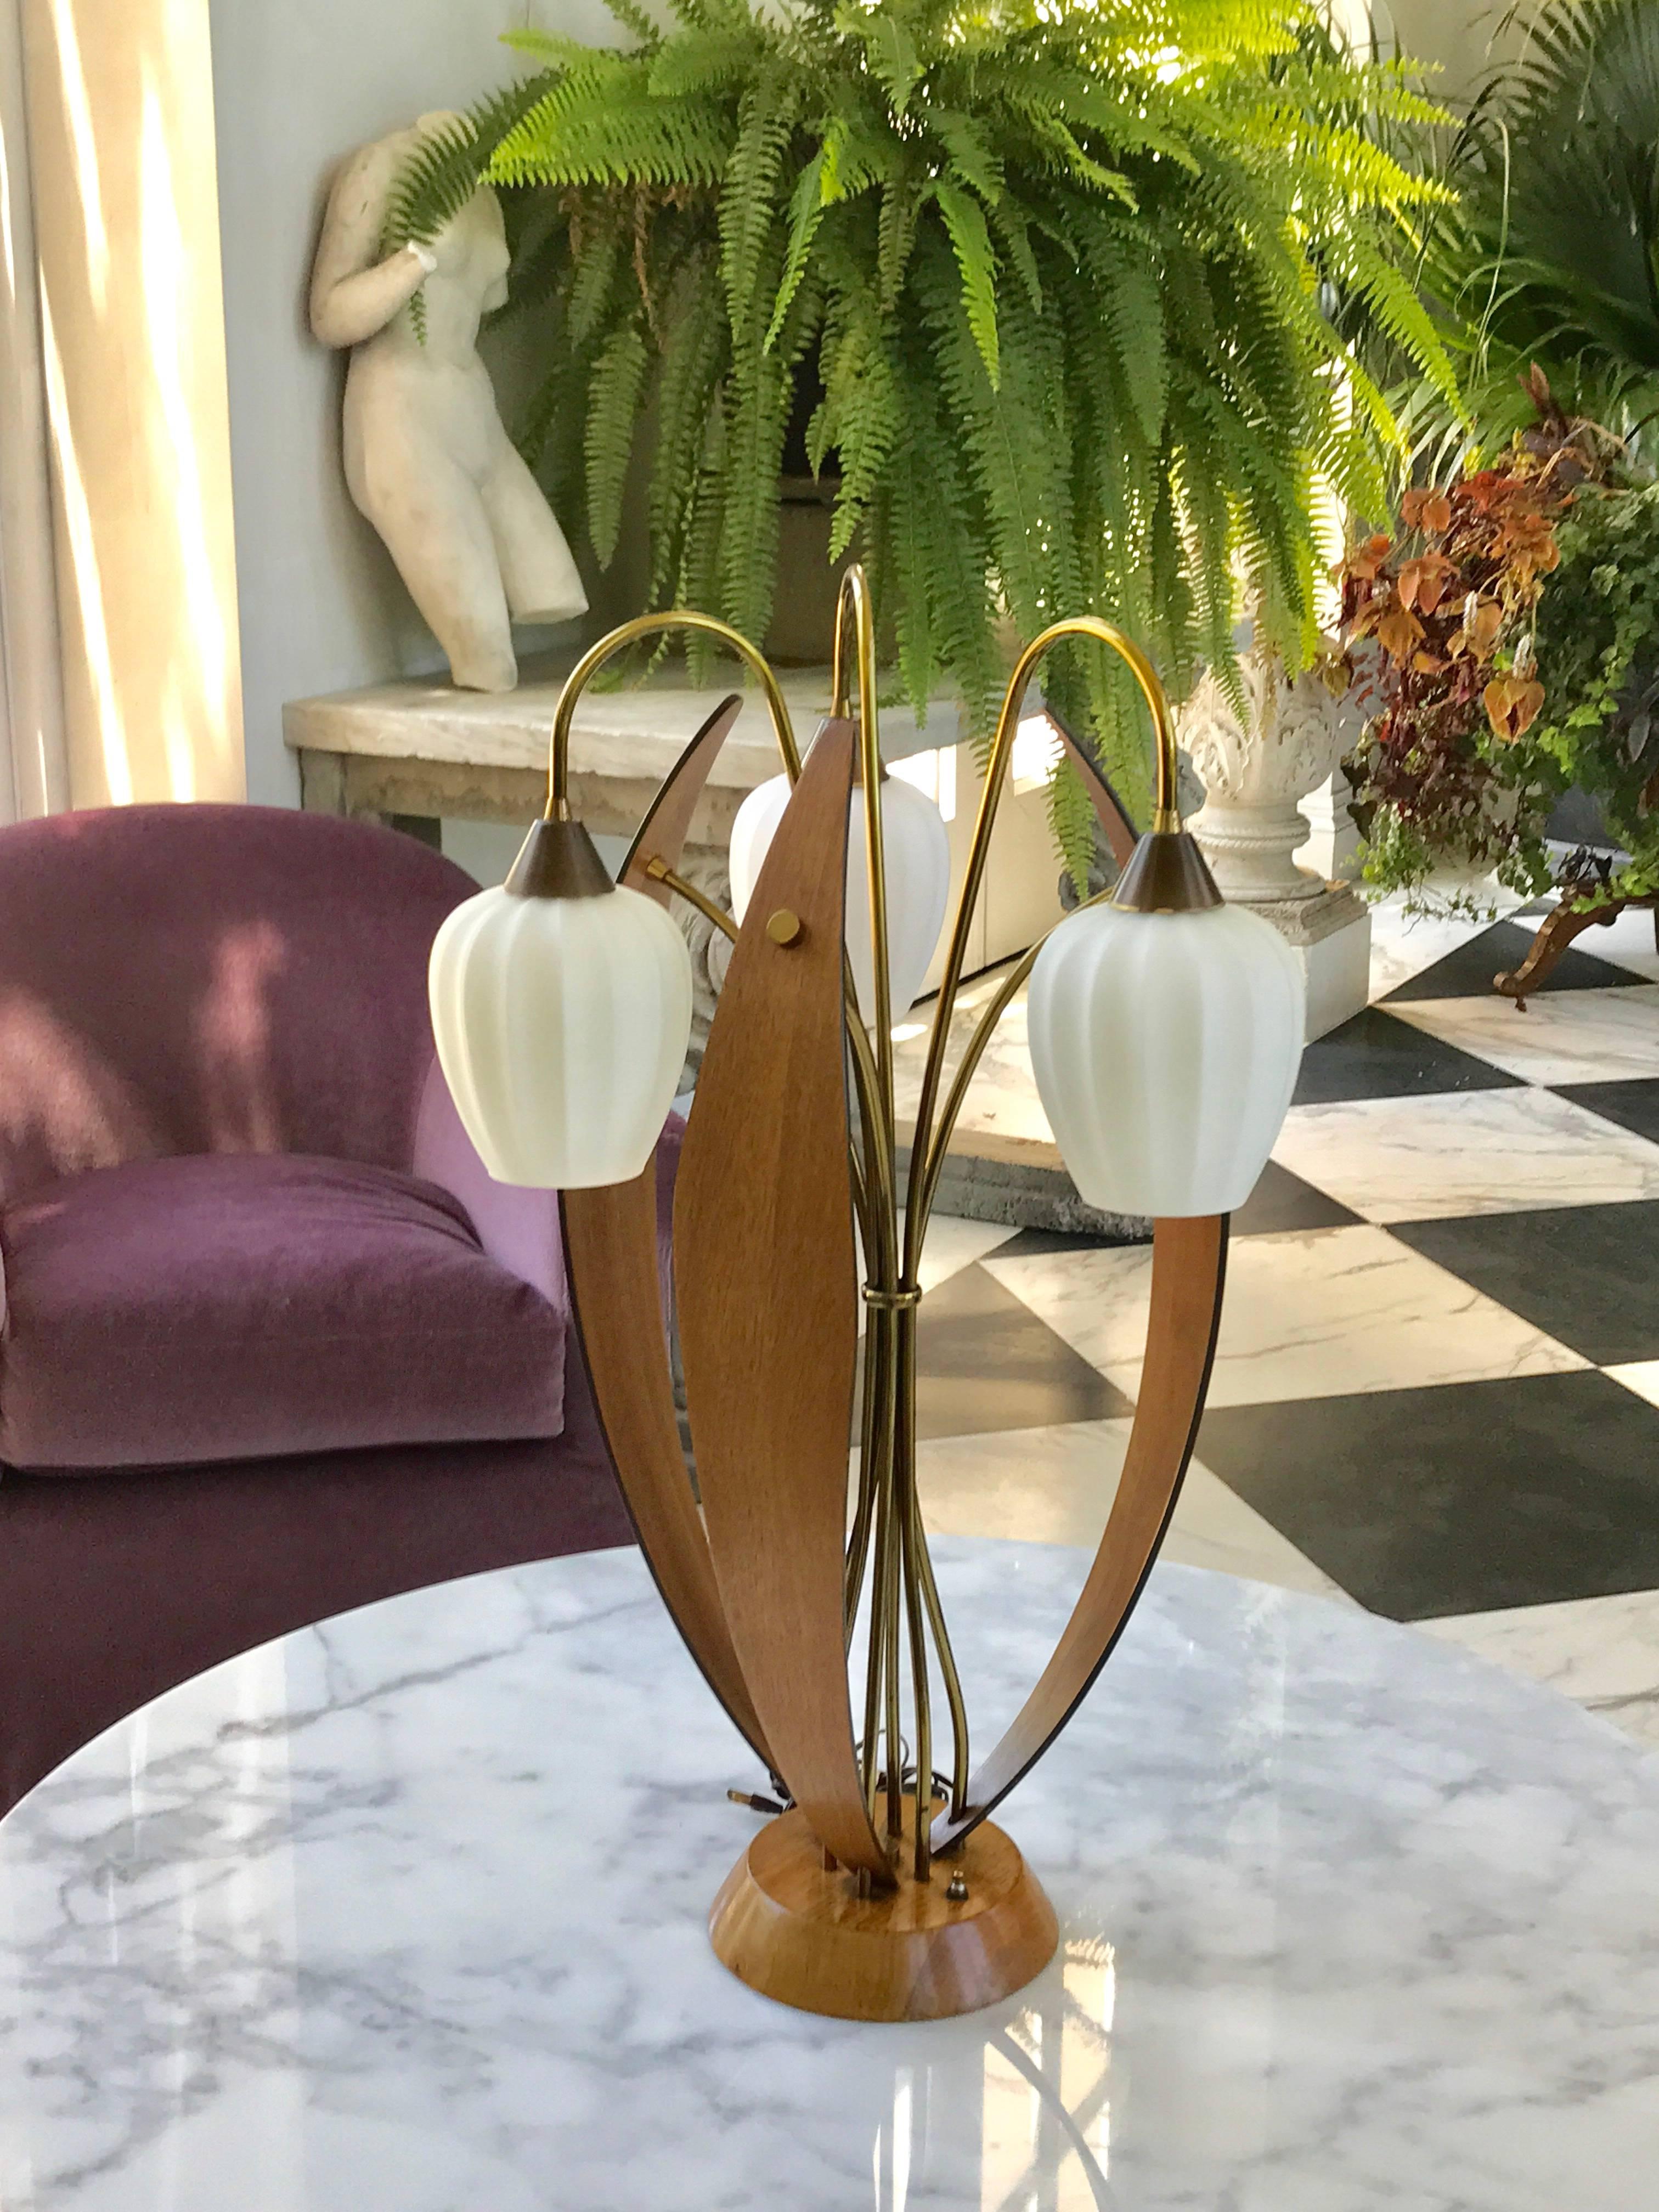 This very unique large-scale brass and walnut table lamp.
It has three frosted glass shades rising out of the central shaft like flowers bound by a brass ring in the middle.
Between them are wooden walnut “sails”.
American made, circa 1970.